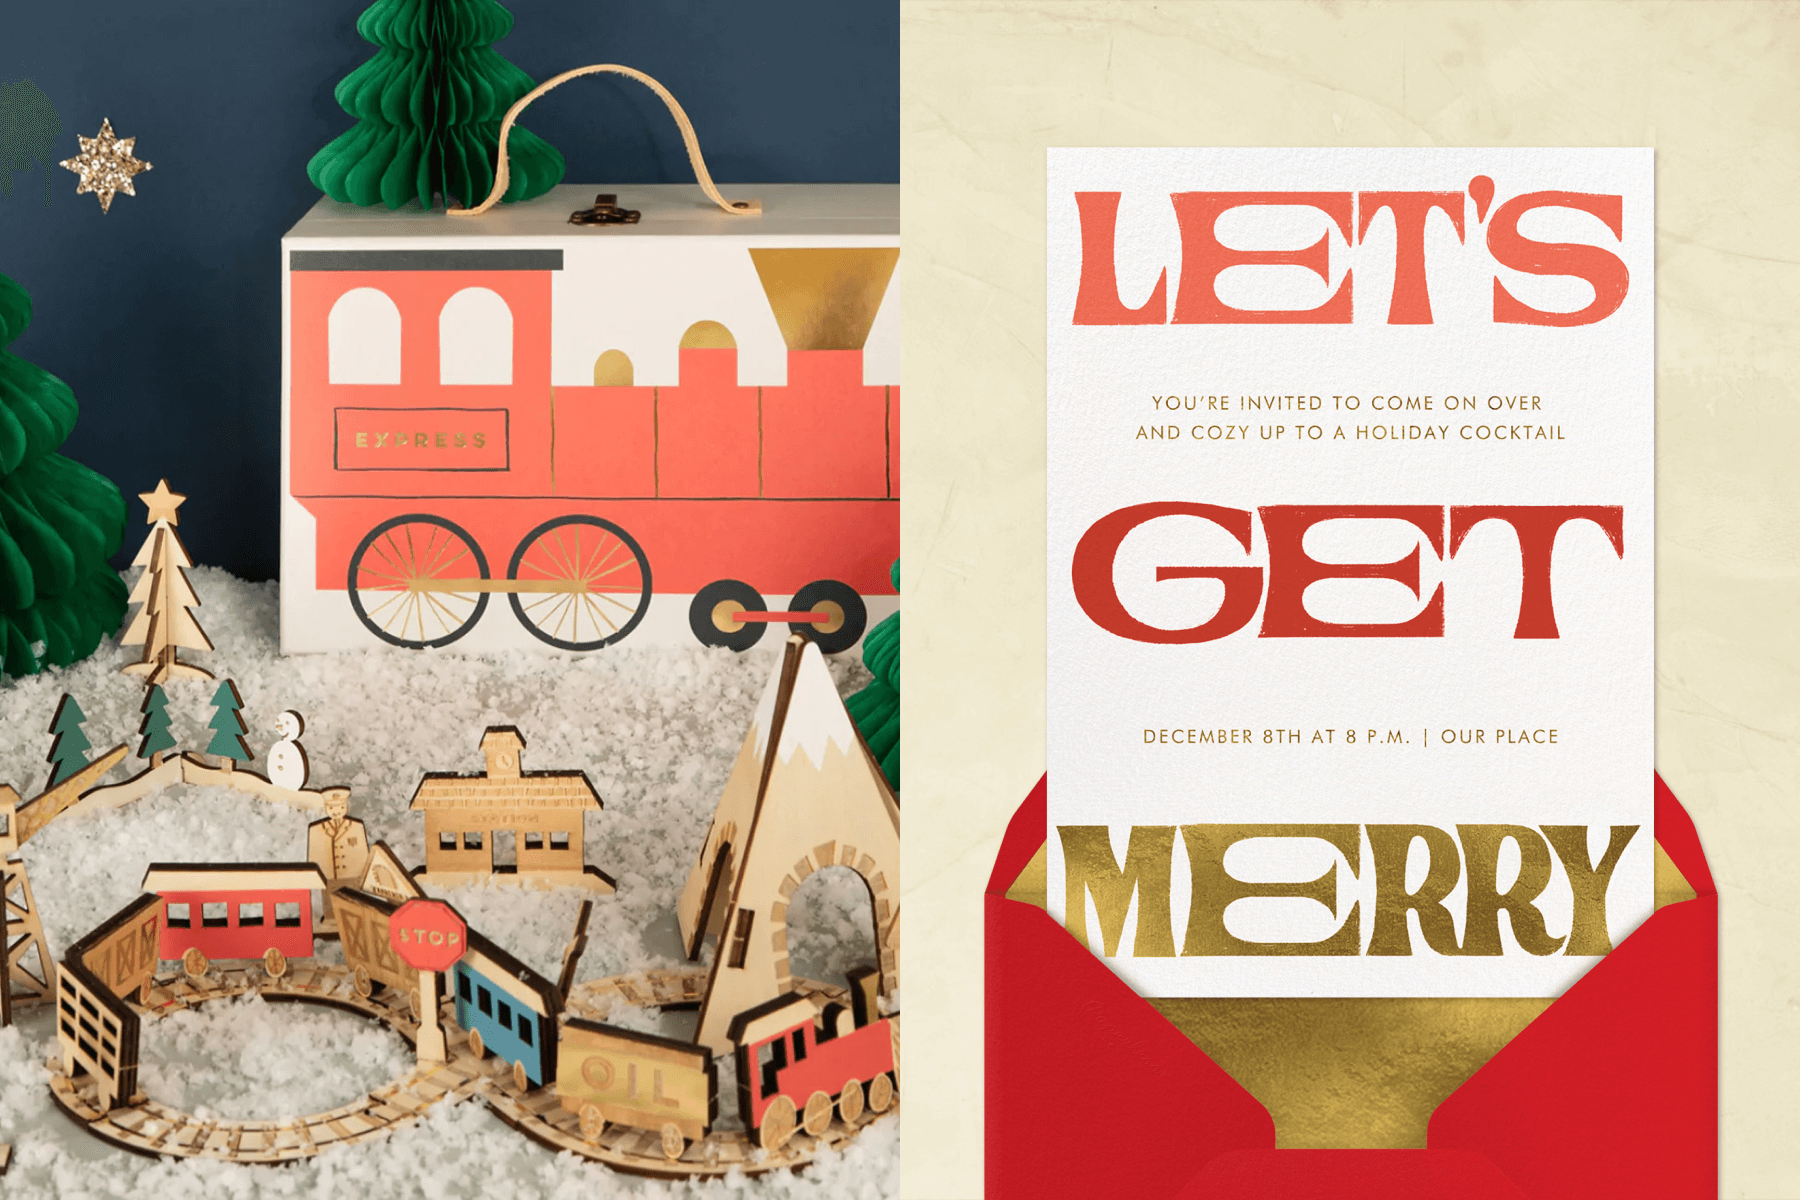 A decorative cutout wooden train set; an invitation that says “LET’S GET MERRY” in large pink, red, and gold letters.